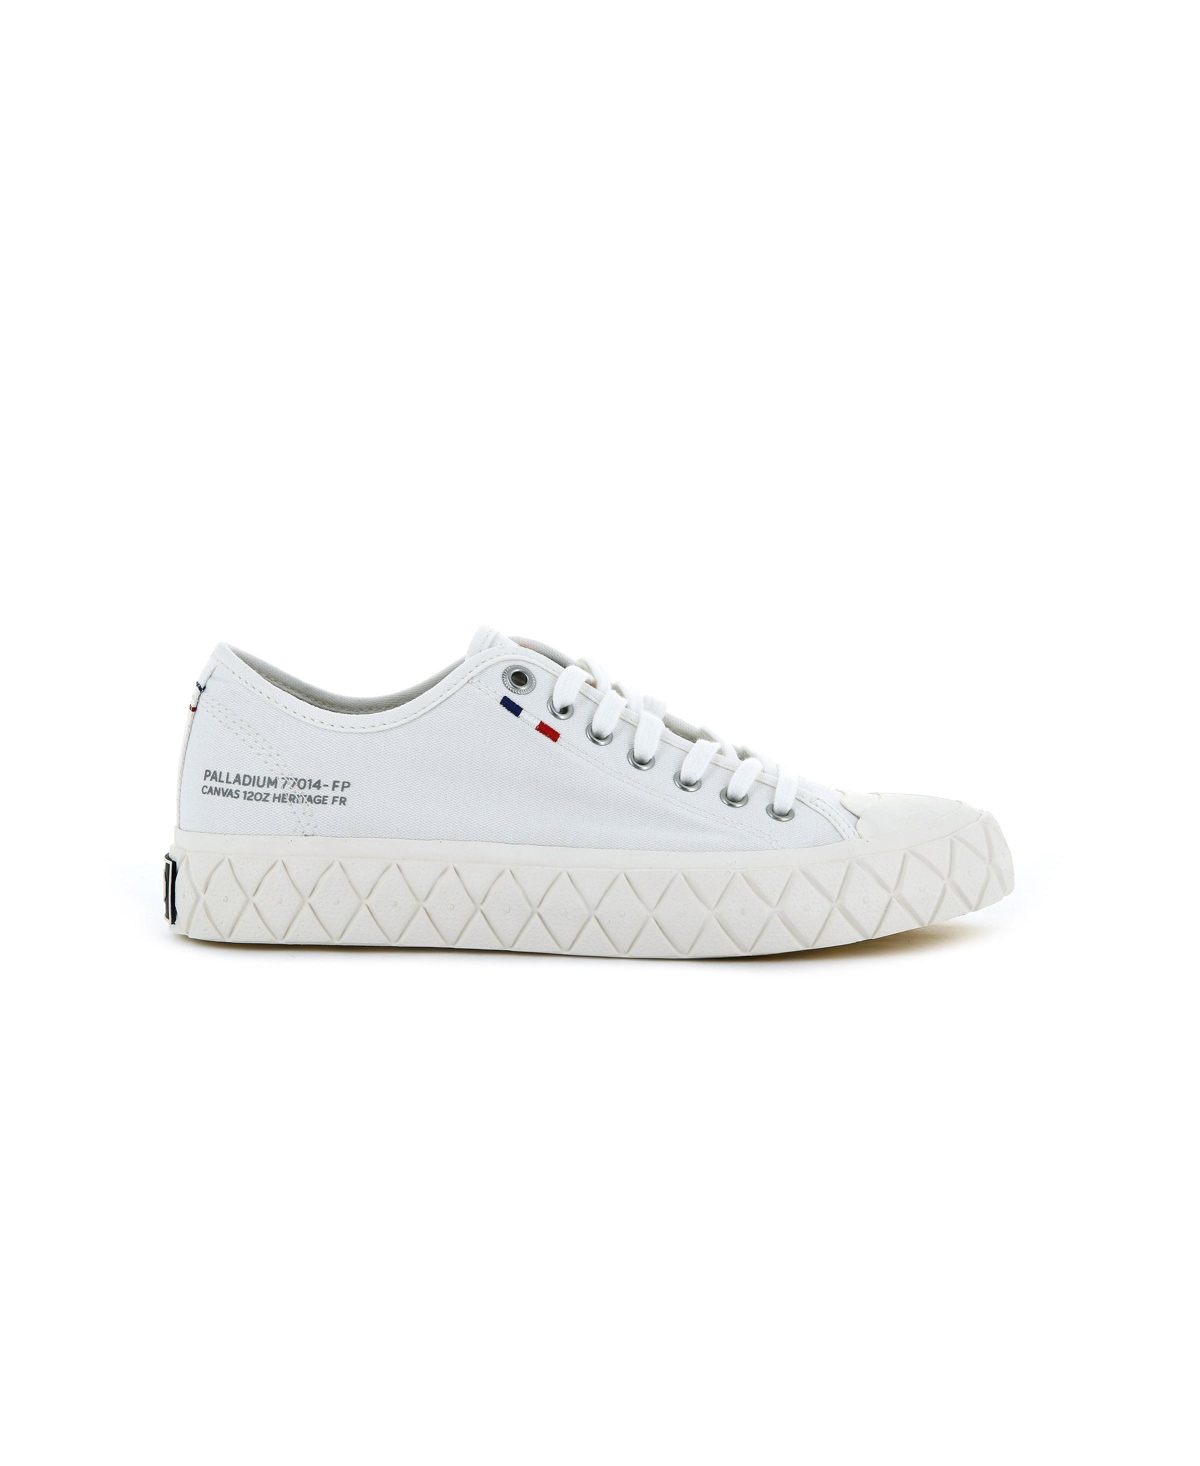 Palla Ace Canvas Unisex Sneakers - Star white